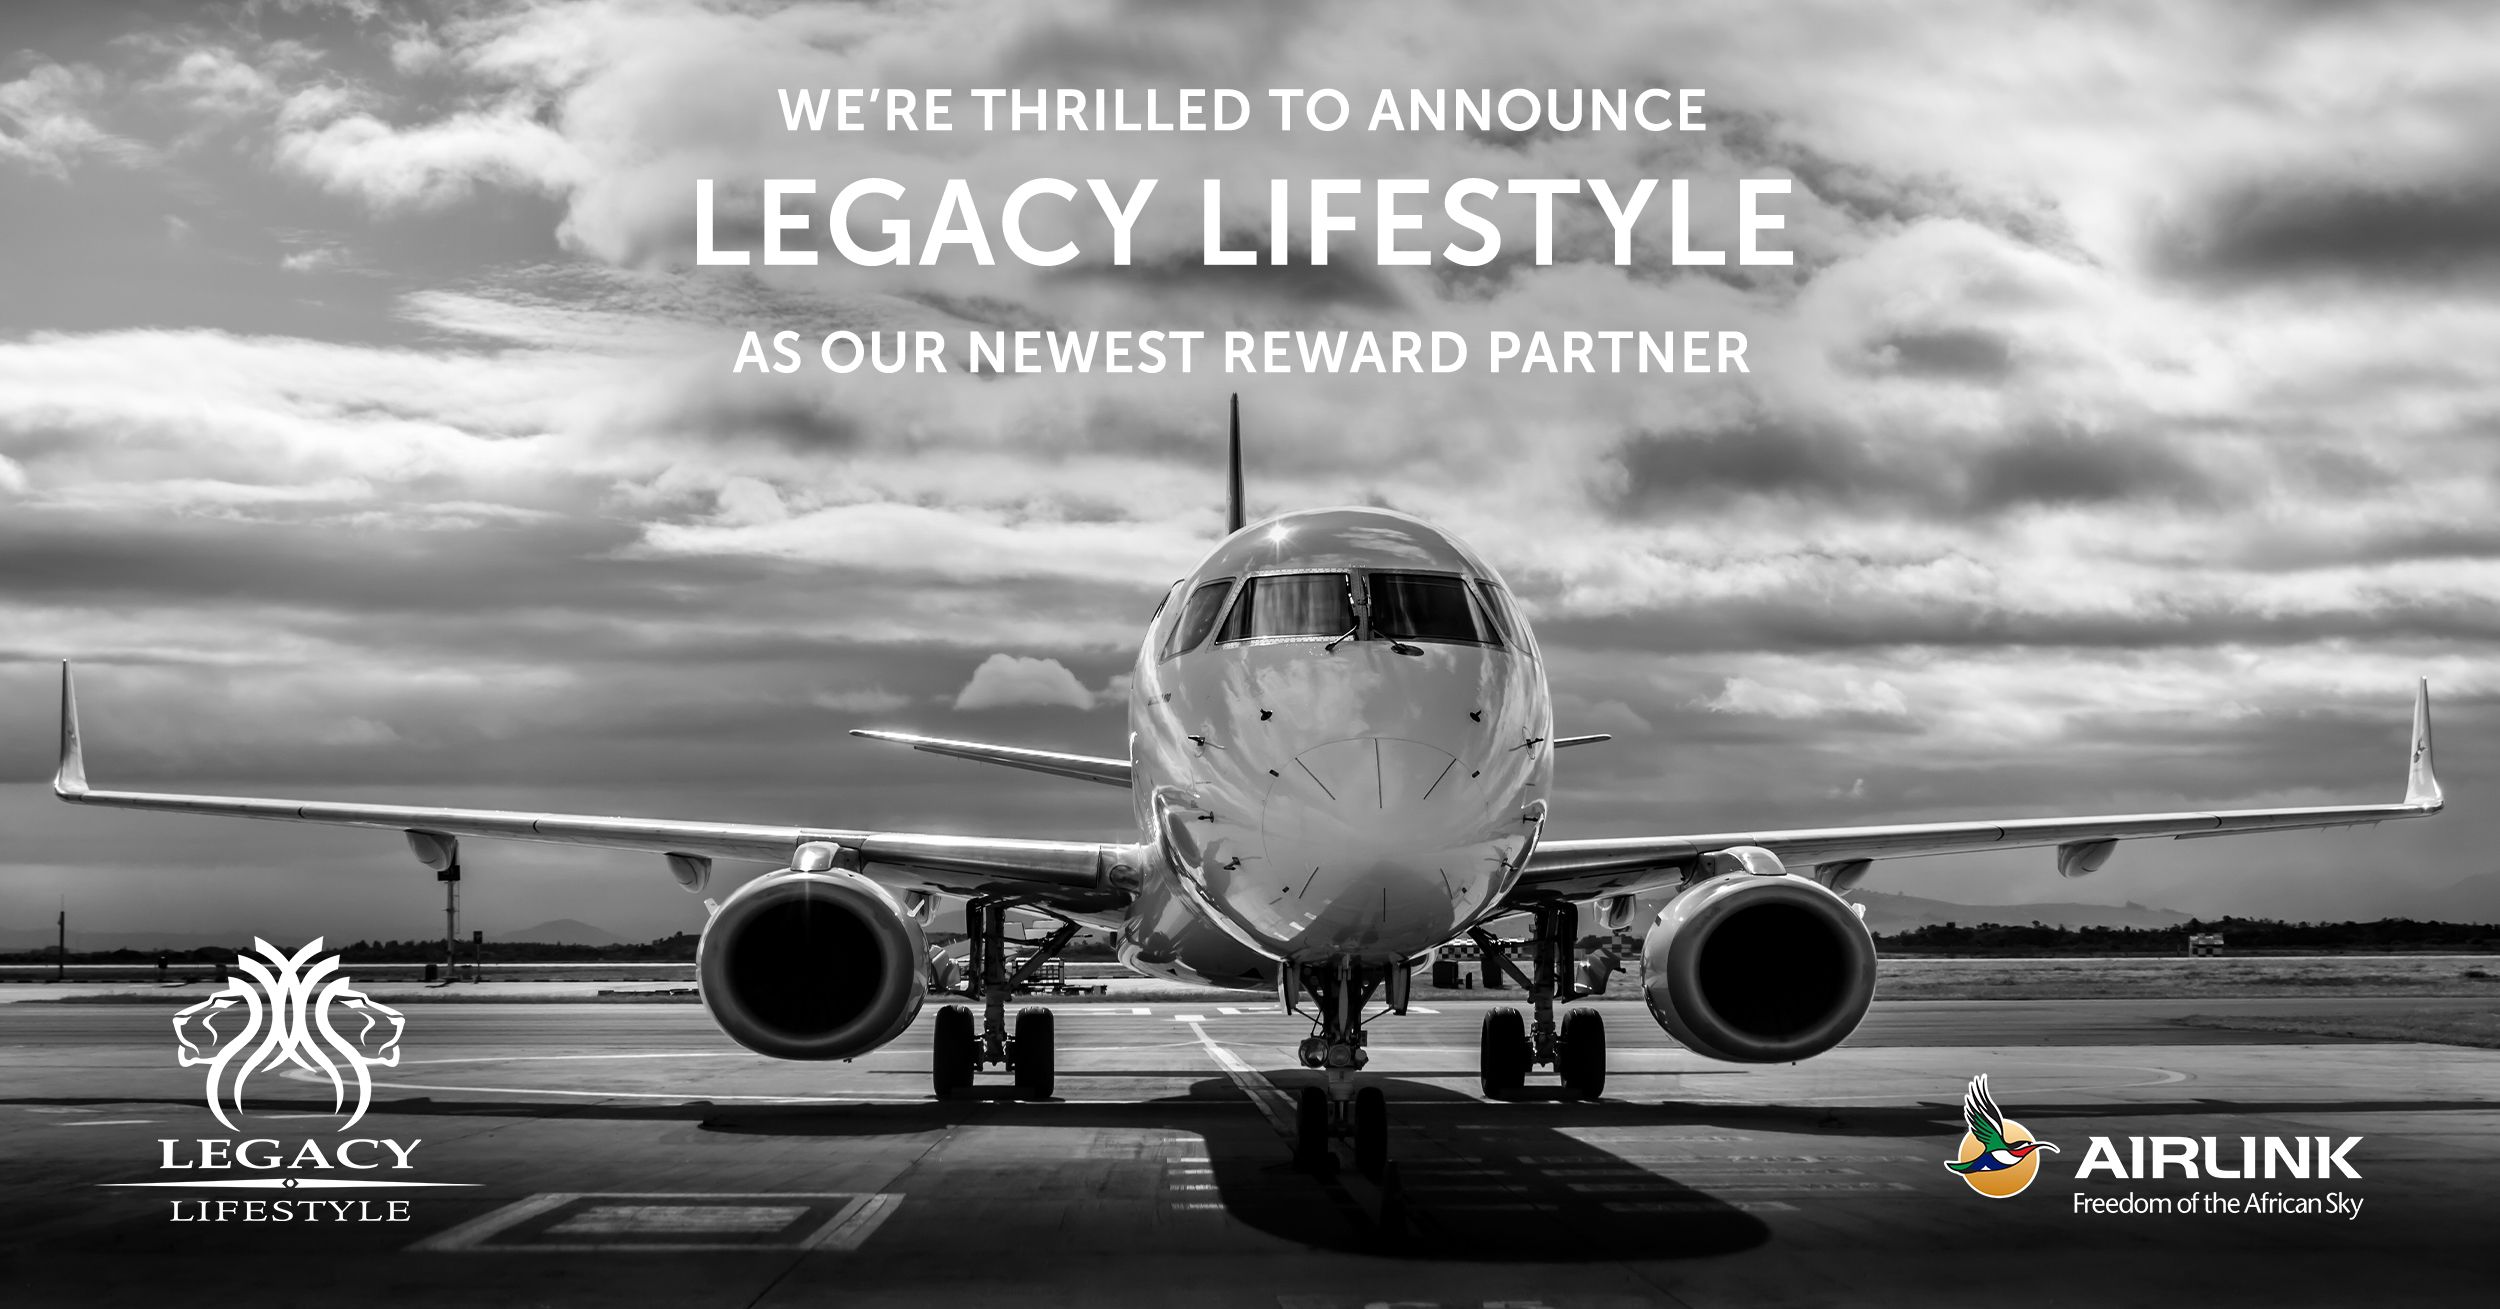 Airlink and Legacy Lifestyle partner to launch Cashback Loyalty Programme